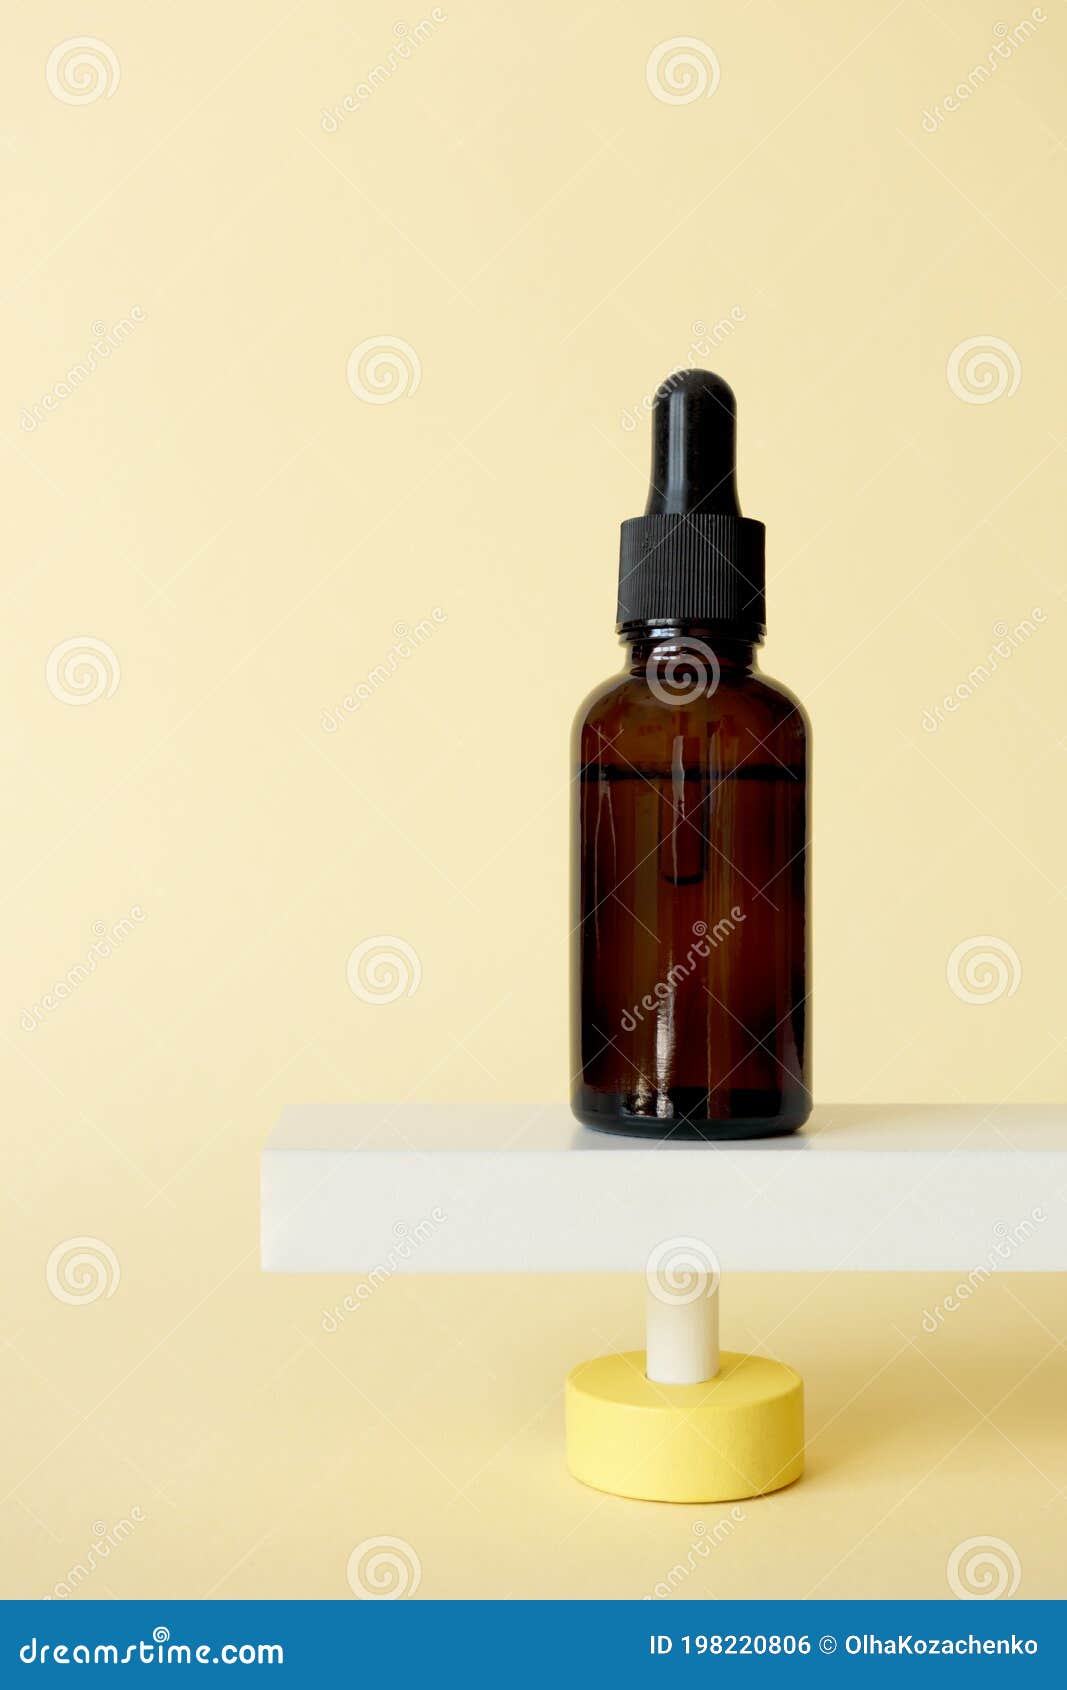 serum facial moisturizer bottle standing on abstract pedestal on pastel yellow background with copy space, front view. blank brown